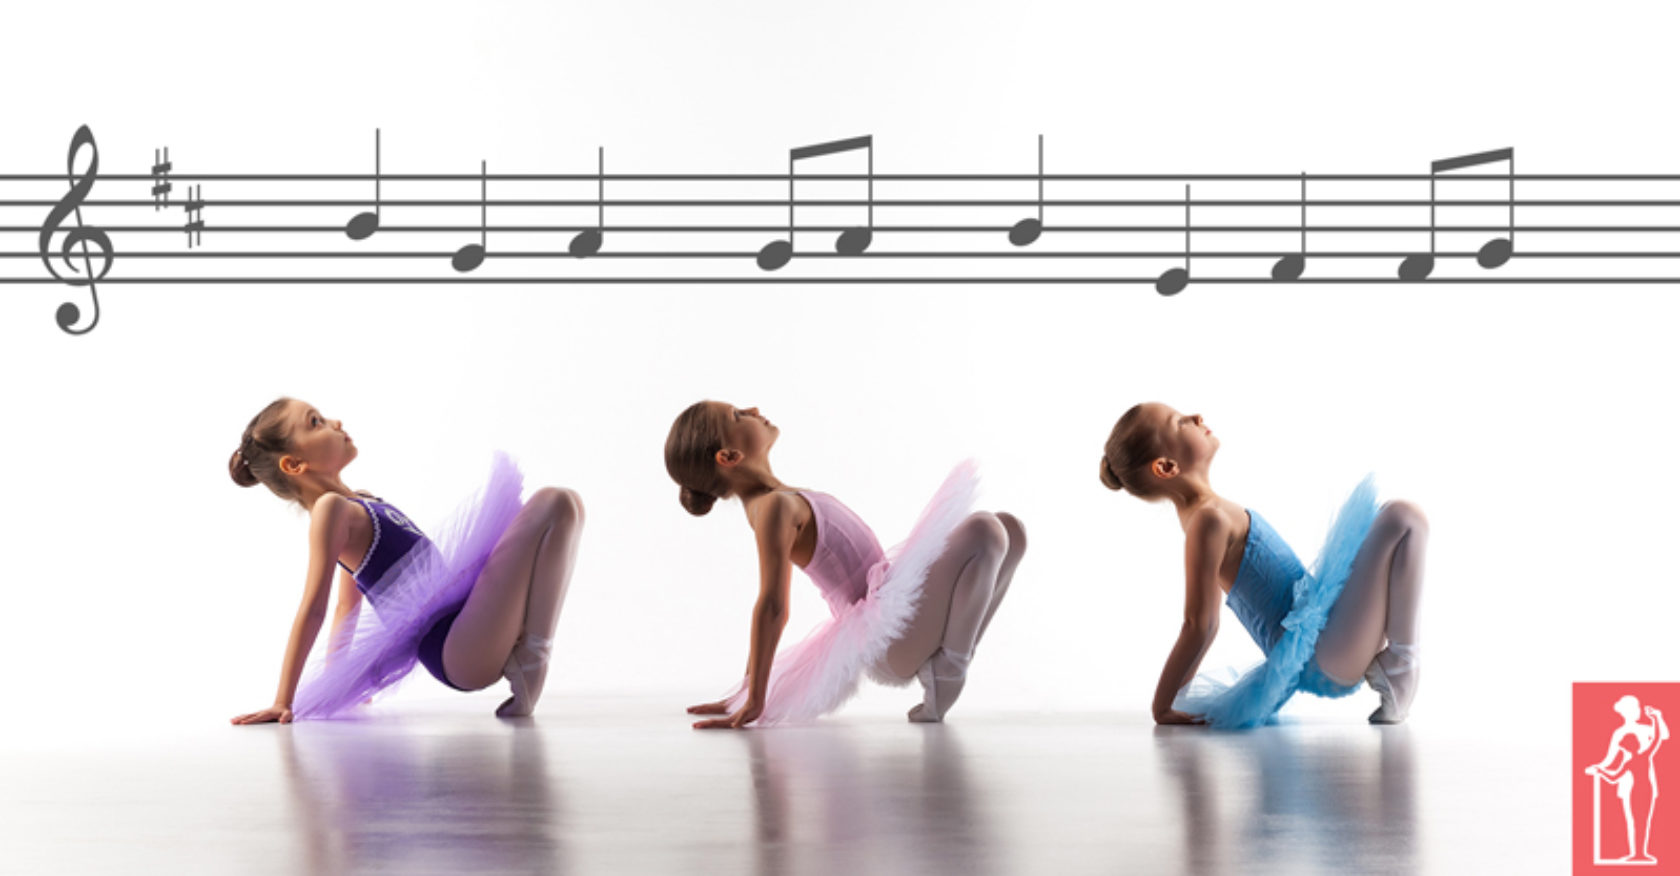 Music and Memory in Pre-Ballet